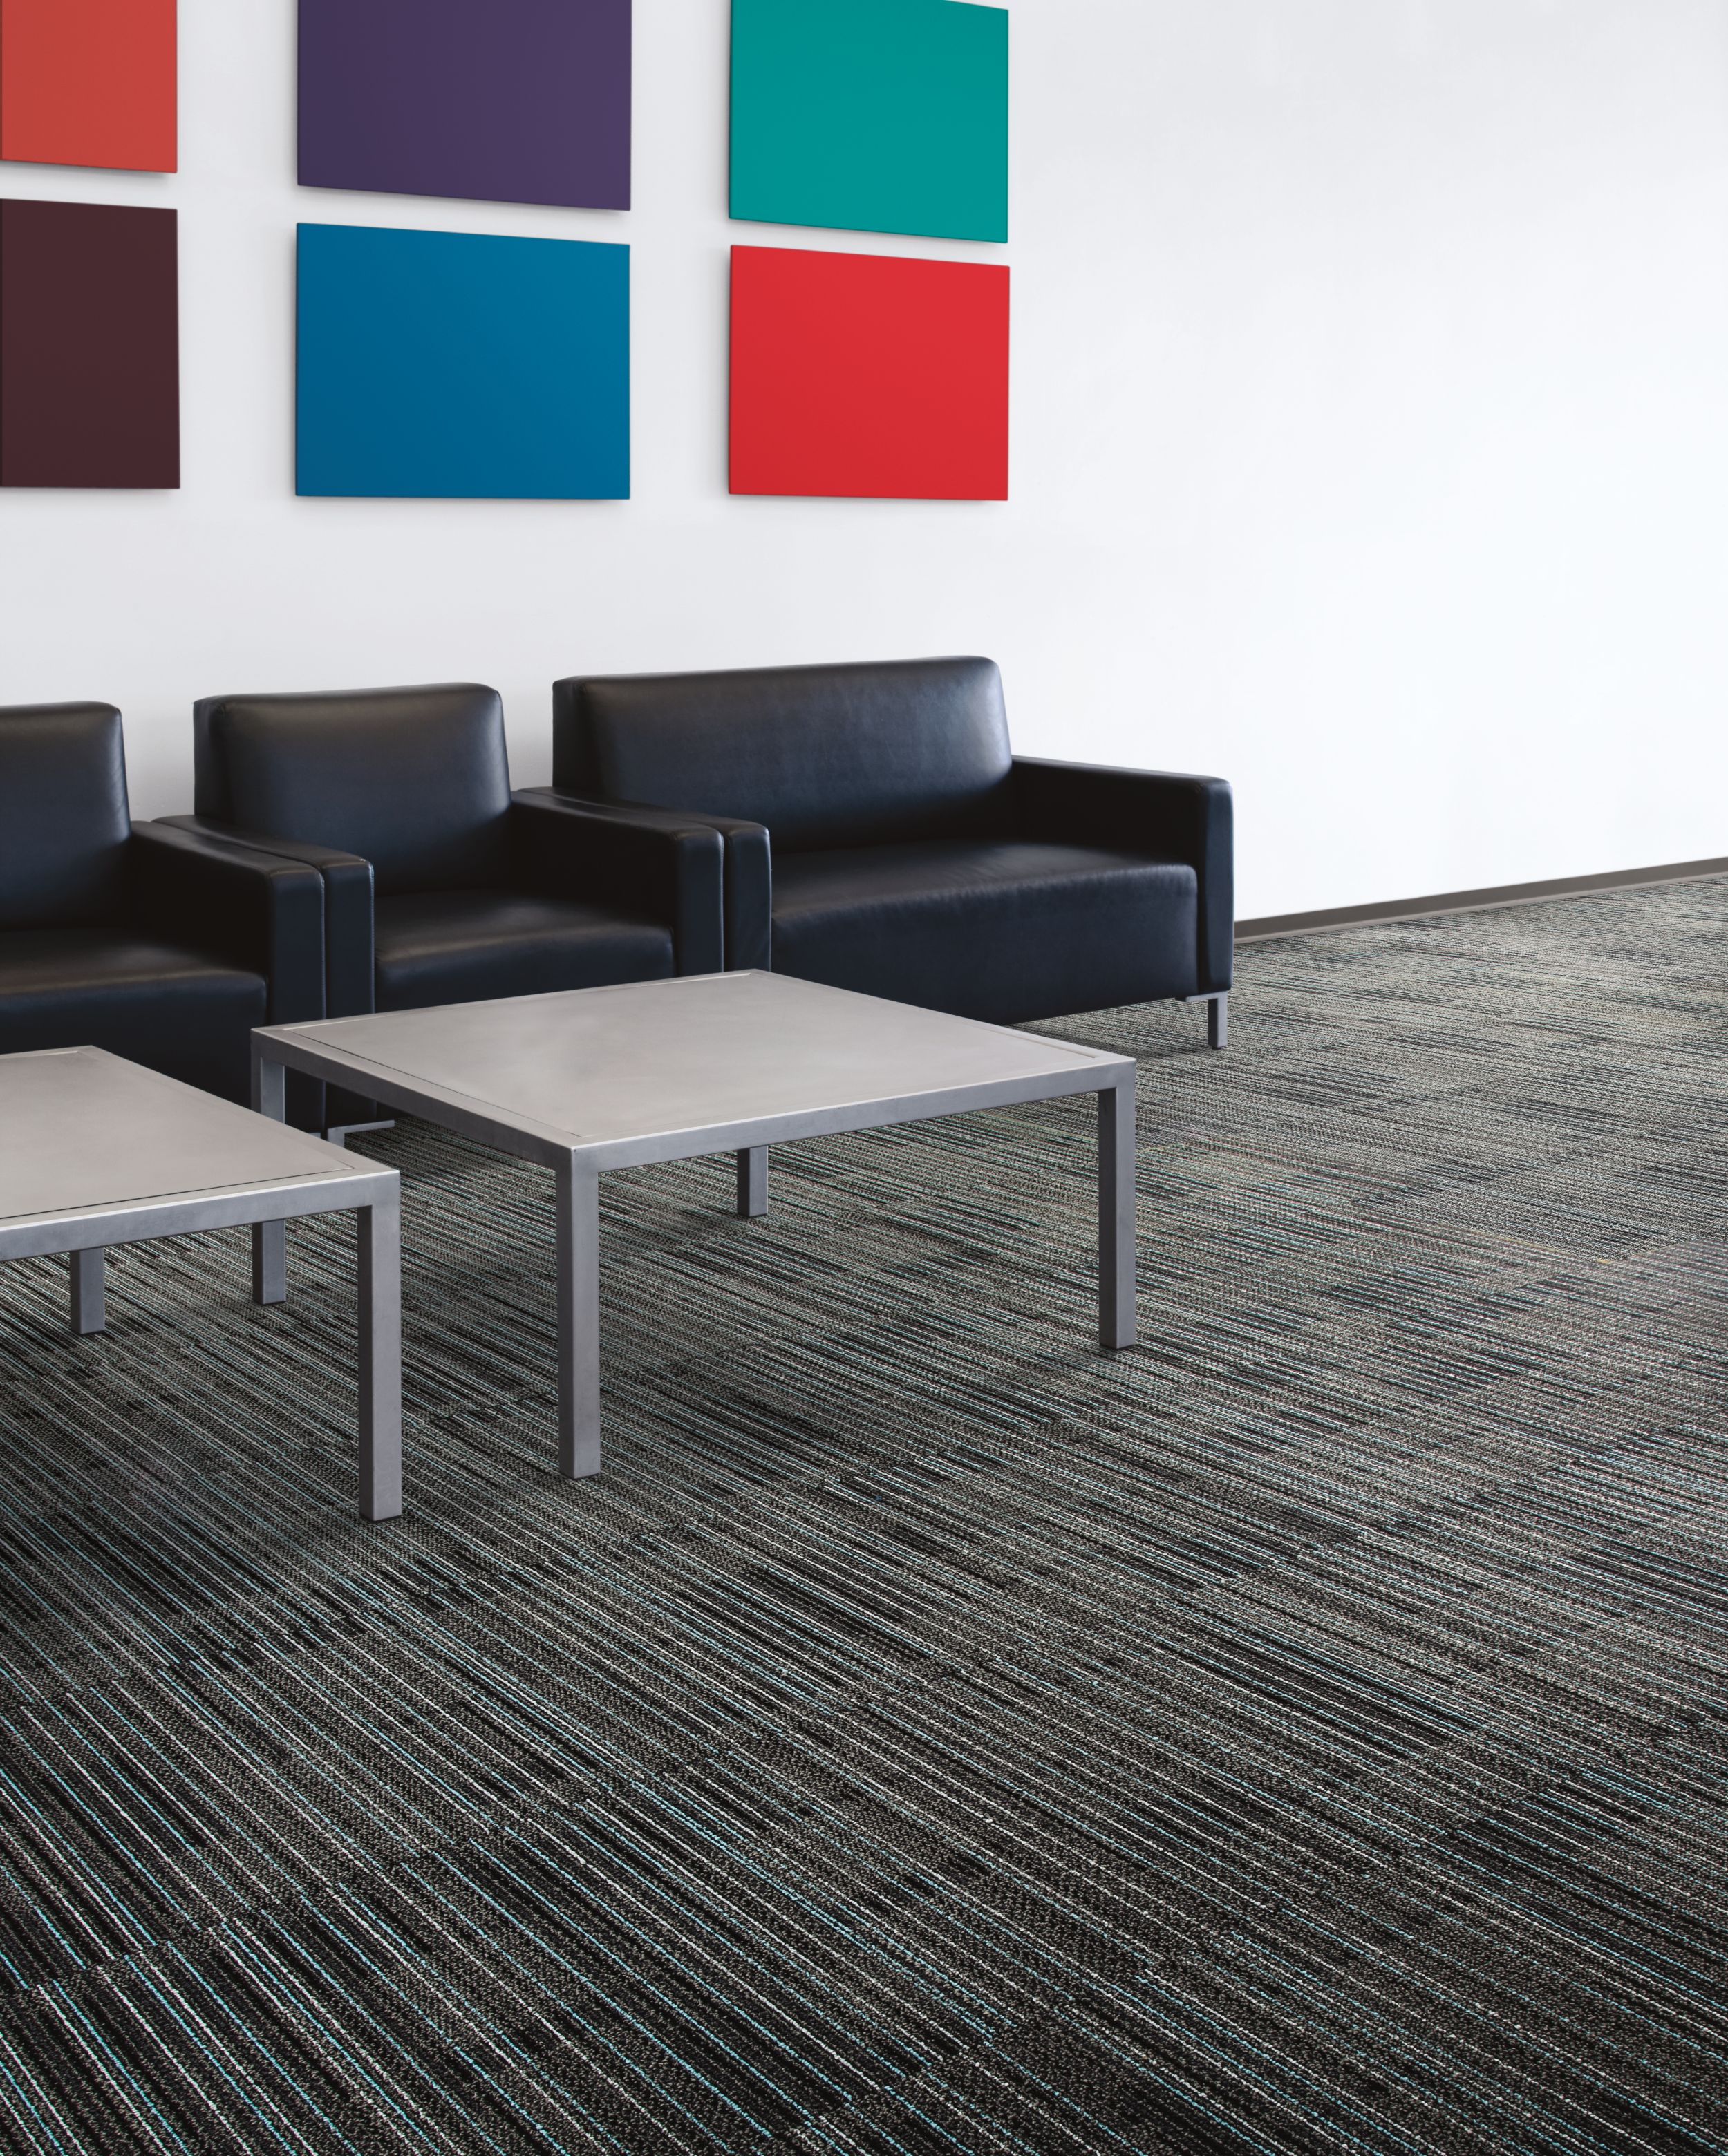 Interface Gather carpet tile in seating area with black chairs and colorful artwork imagen número 6